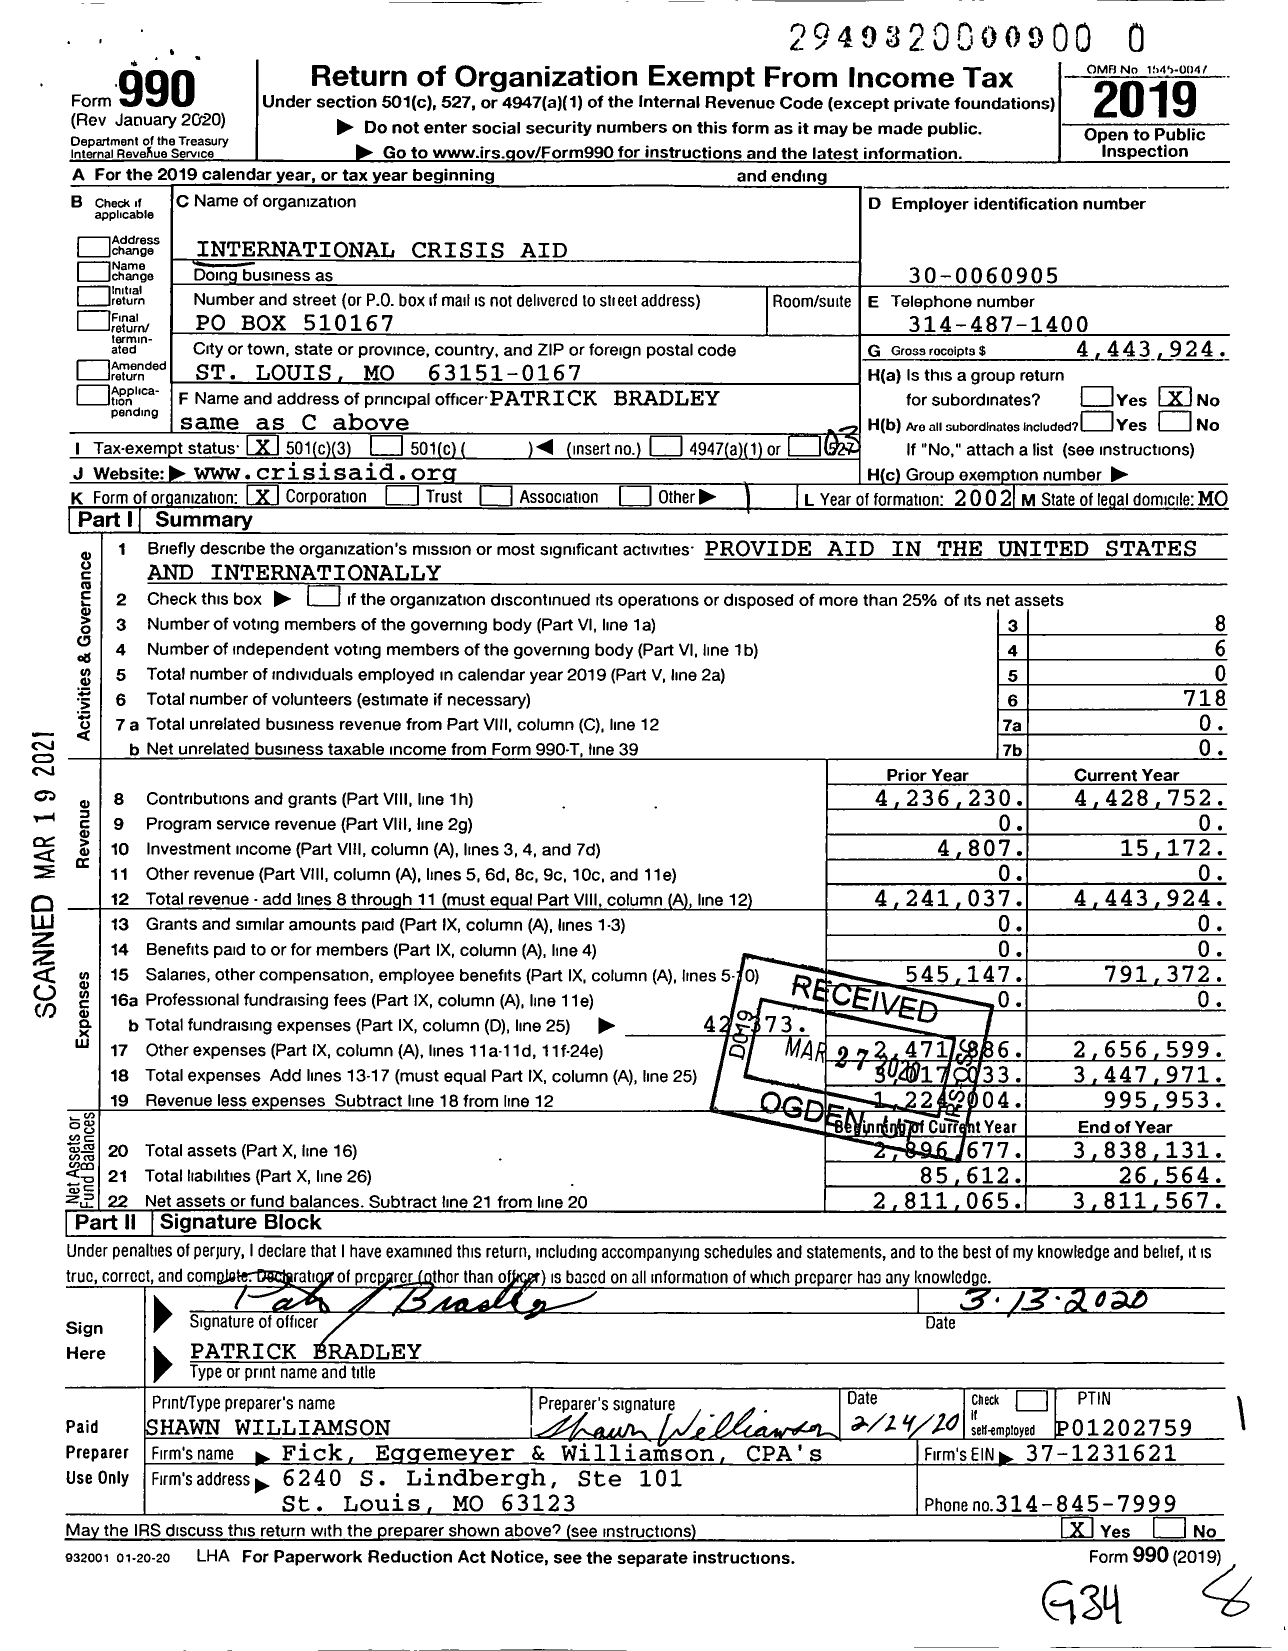 Image of first page of 2019 Form 990 for International Crisis Aid